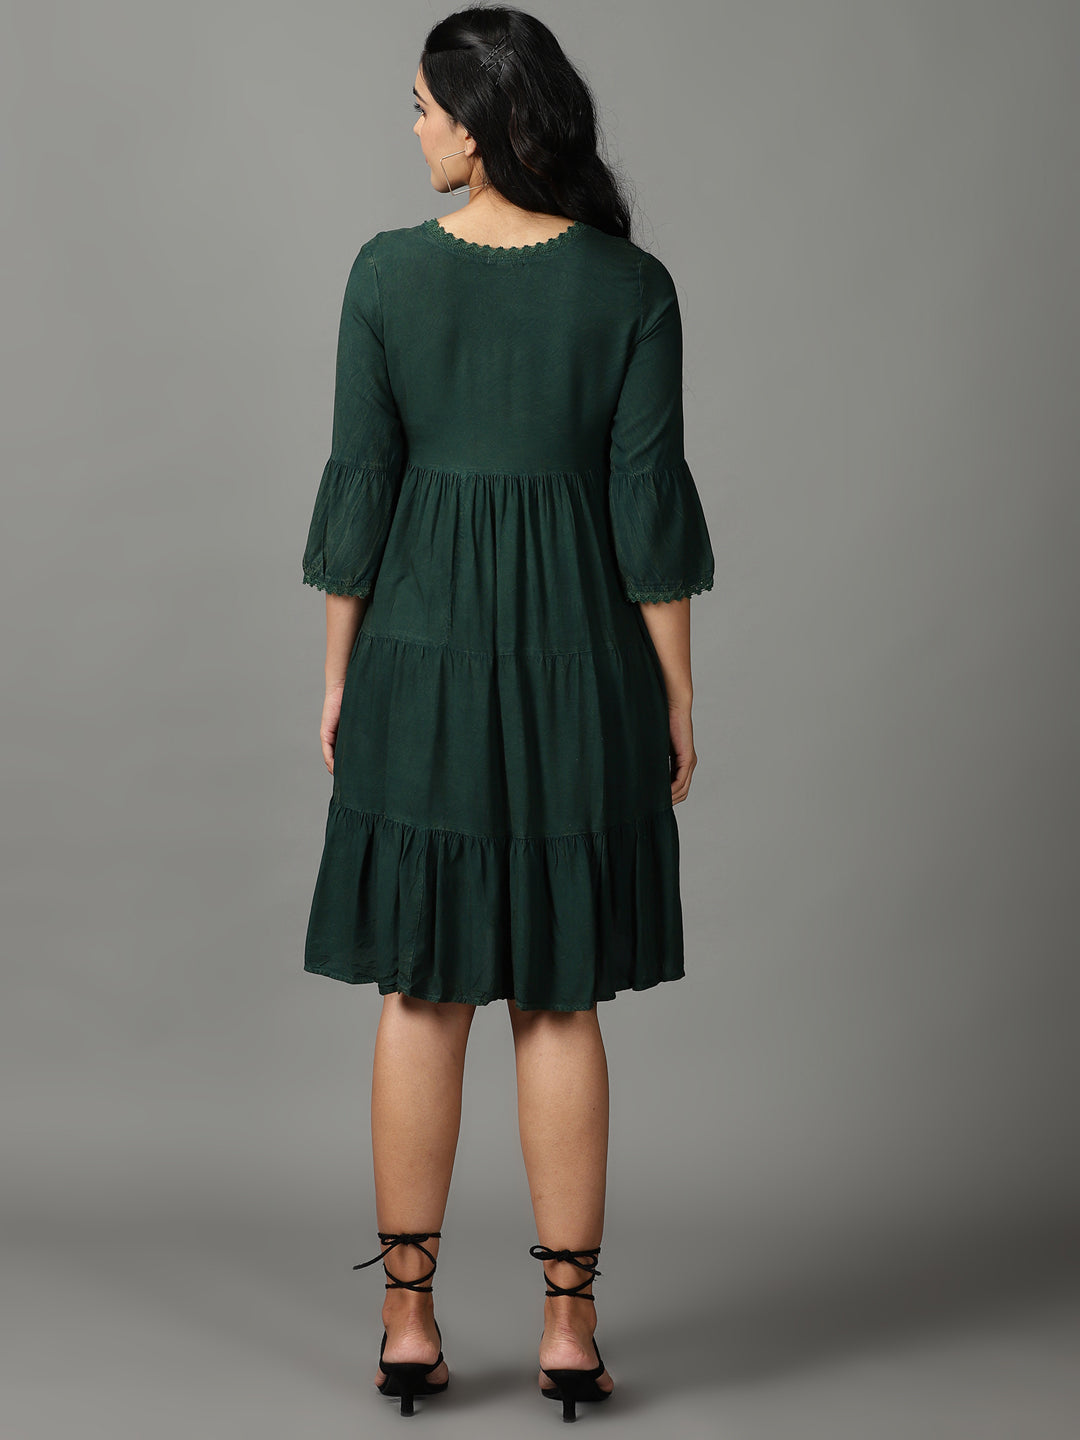 Women's Olive Solid Empire Dress